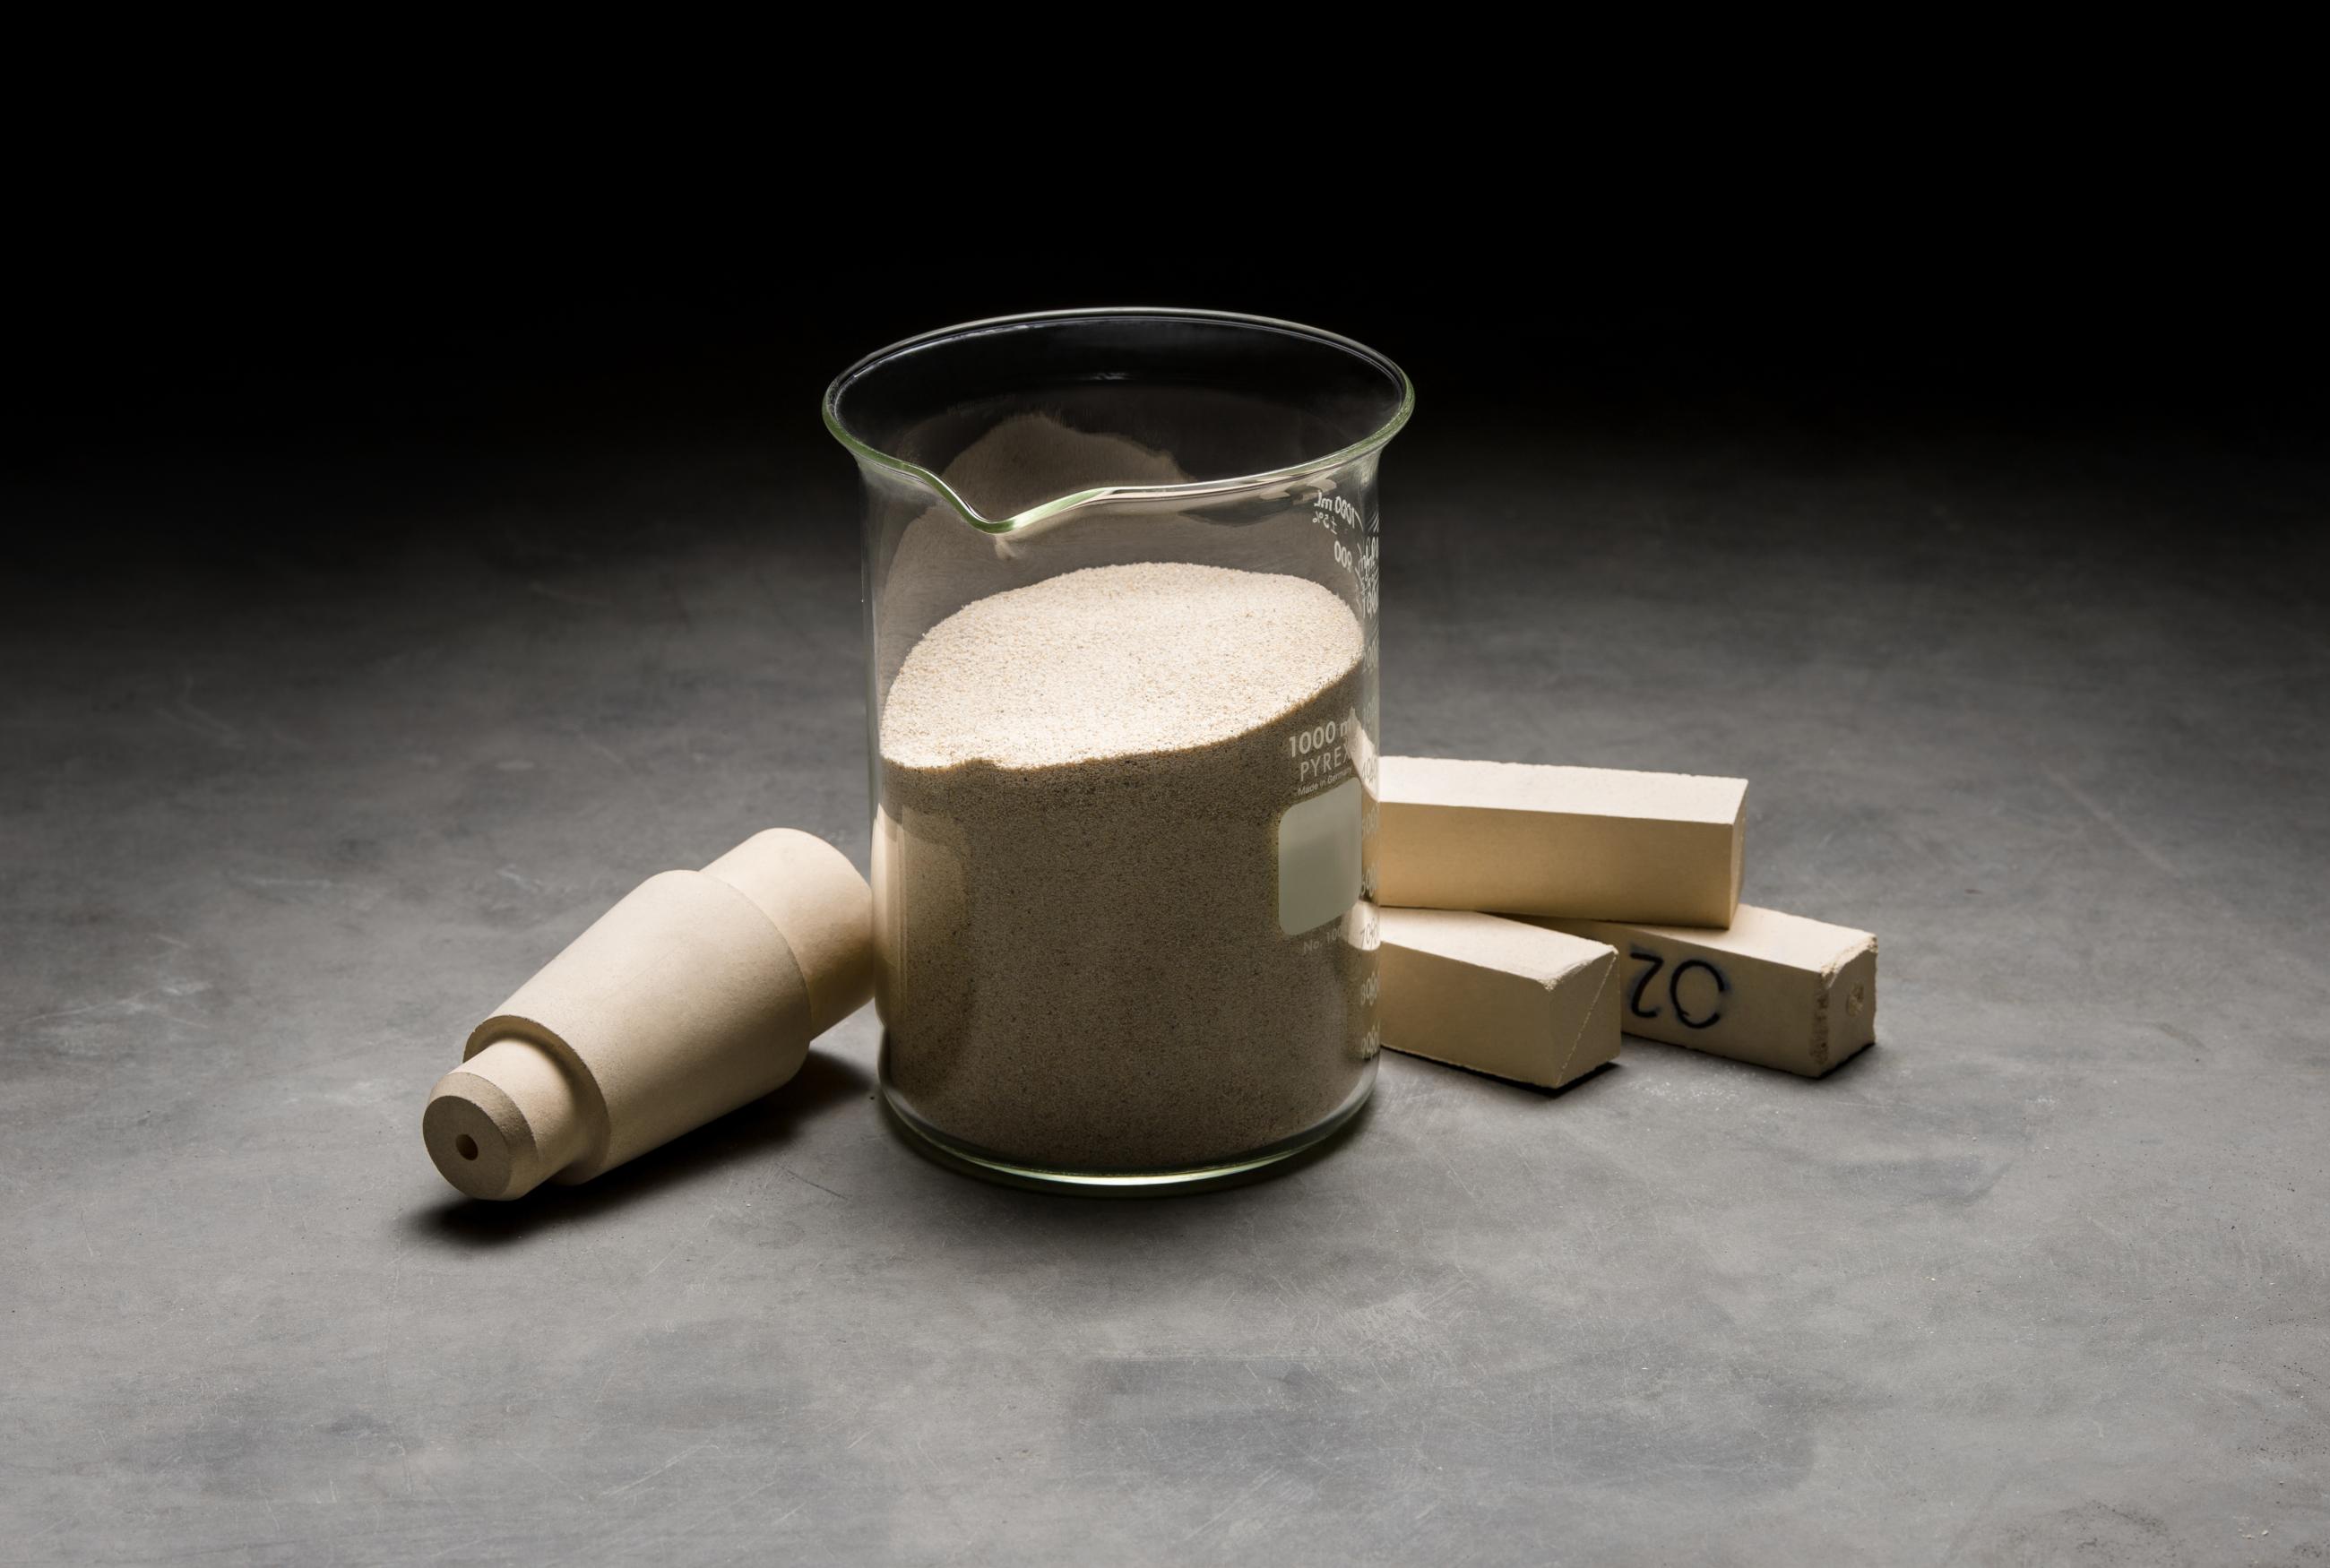 Zirconia material imagery with items in a glass beaker and on display around it, dramatically lit 